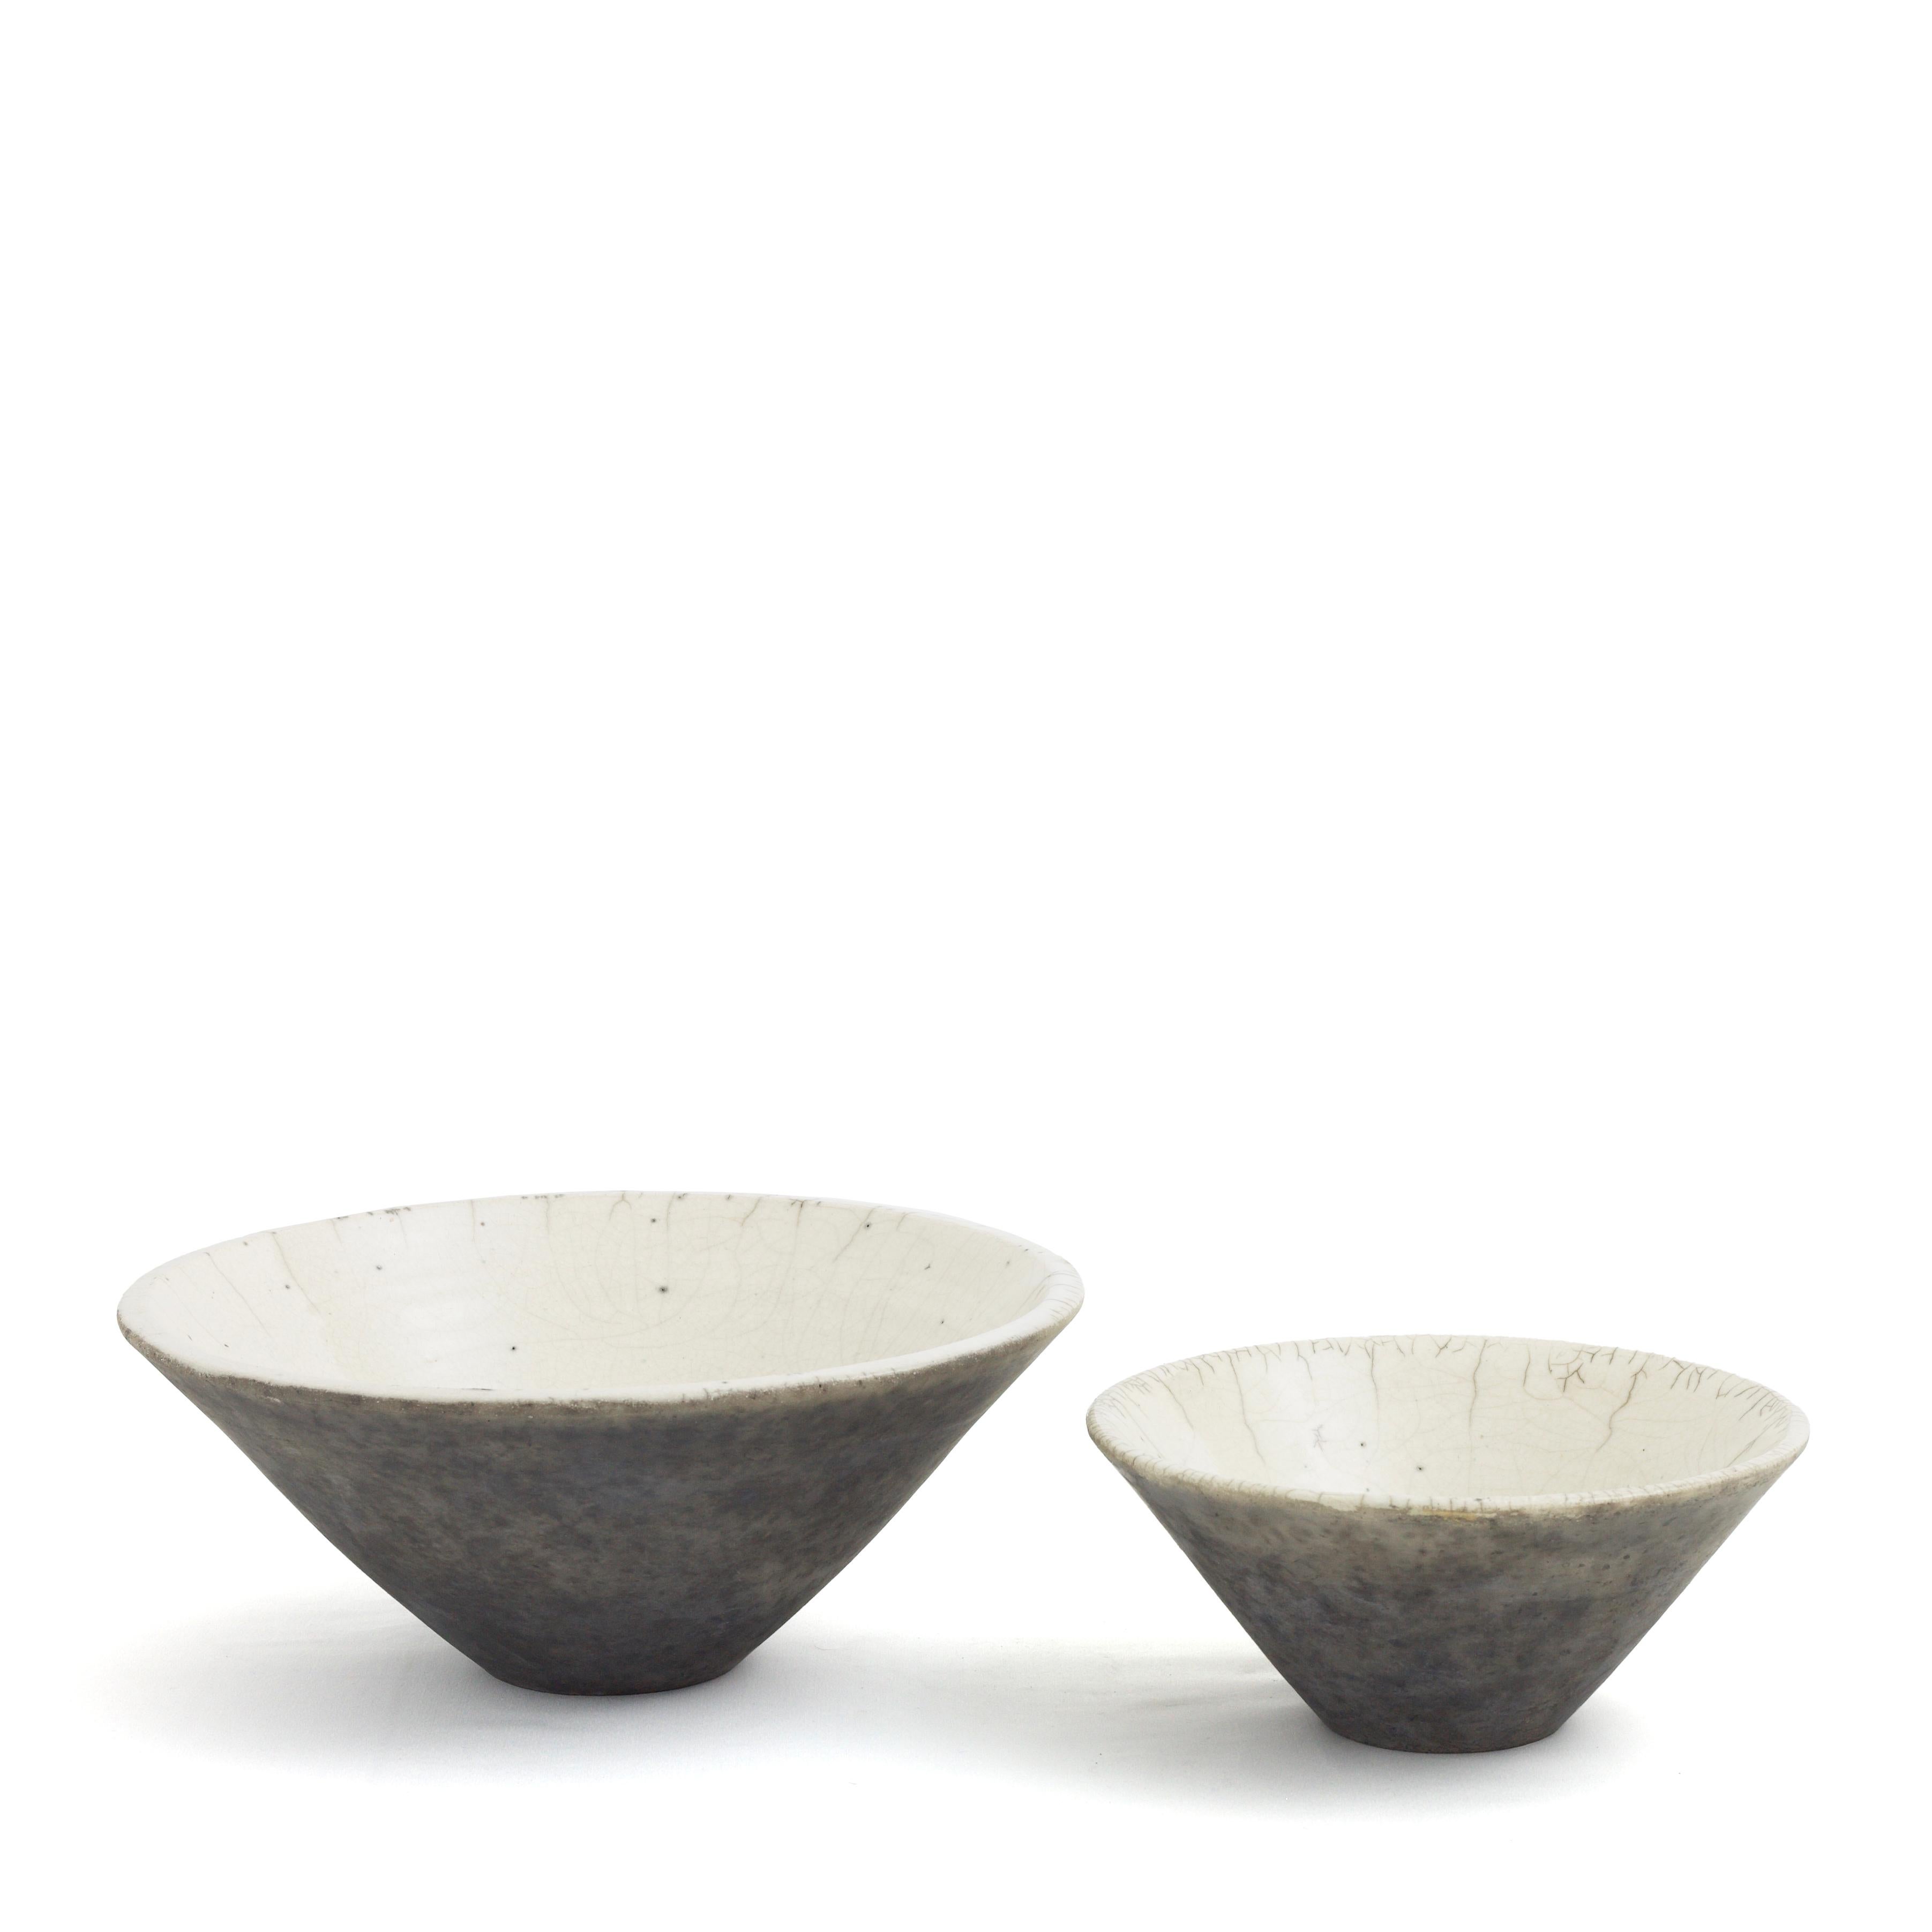 Wu bowl duo

This one-of-a-kind set of two ceramic bowls is a showcase of pottery craftsmanship in impeccable Japanese style. Result of the ancient Raku technique, the dynamic crackled effect gracing the pieces gets combined with an intensely